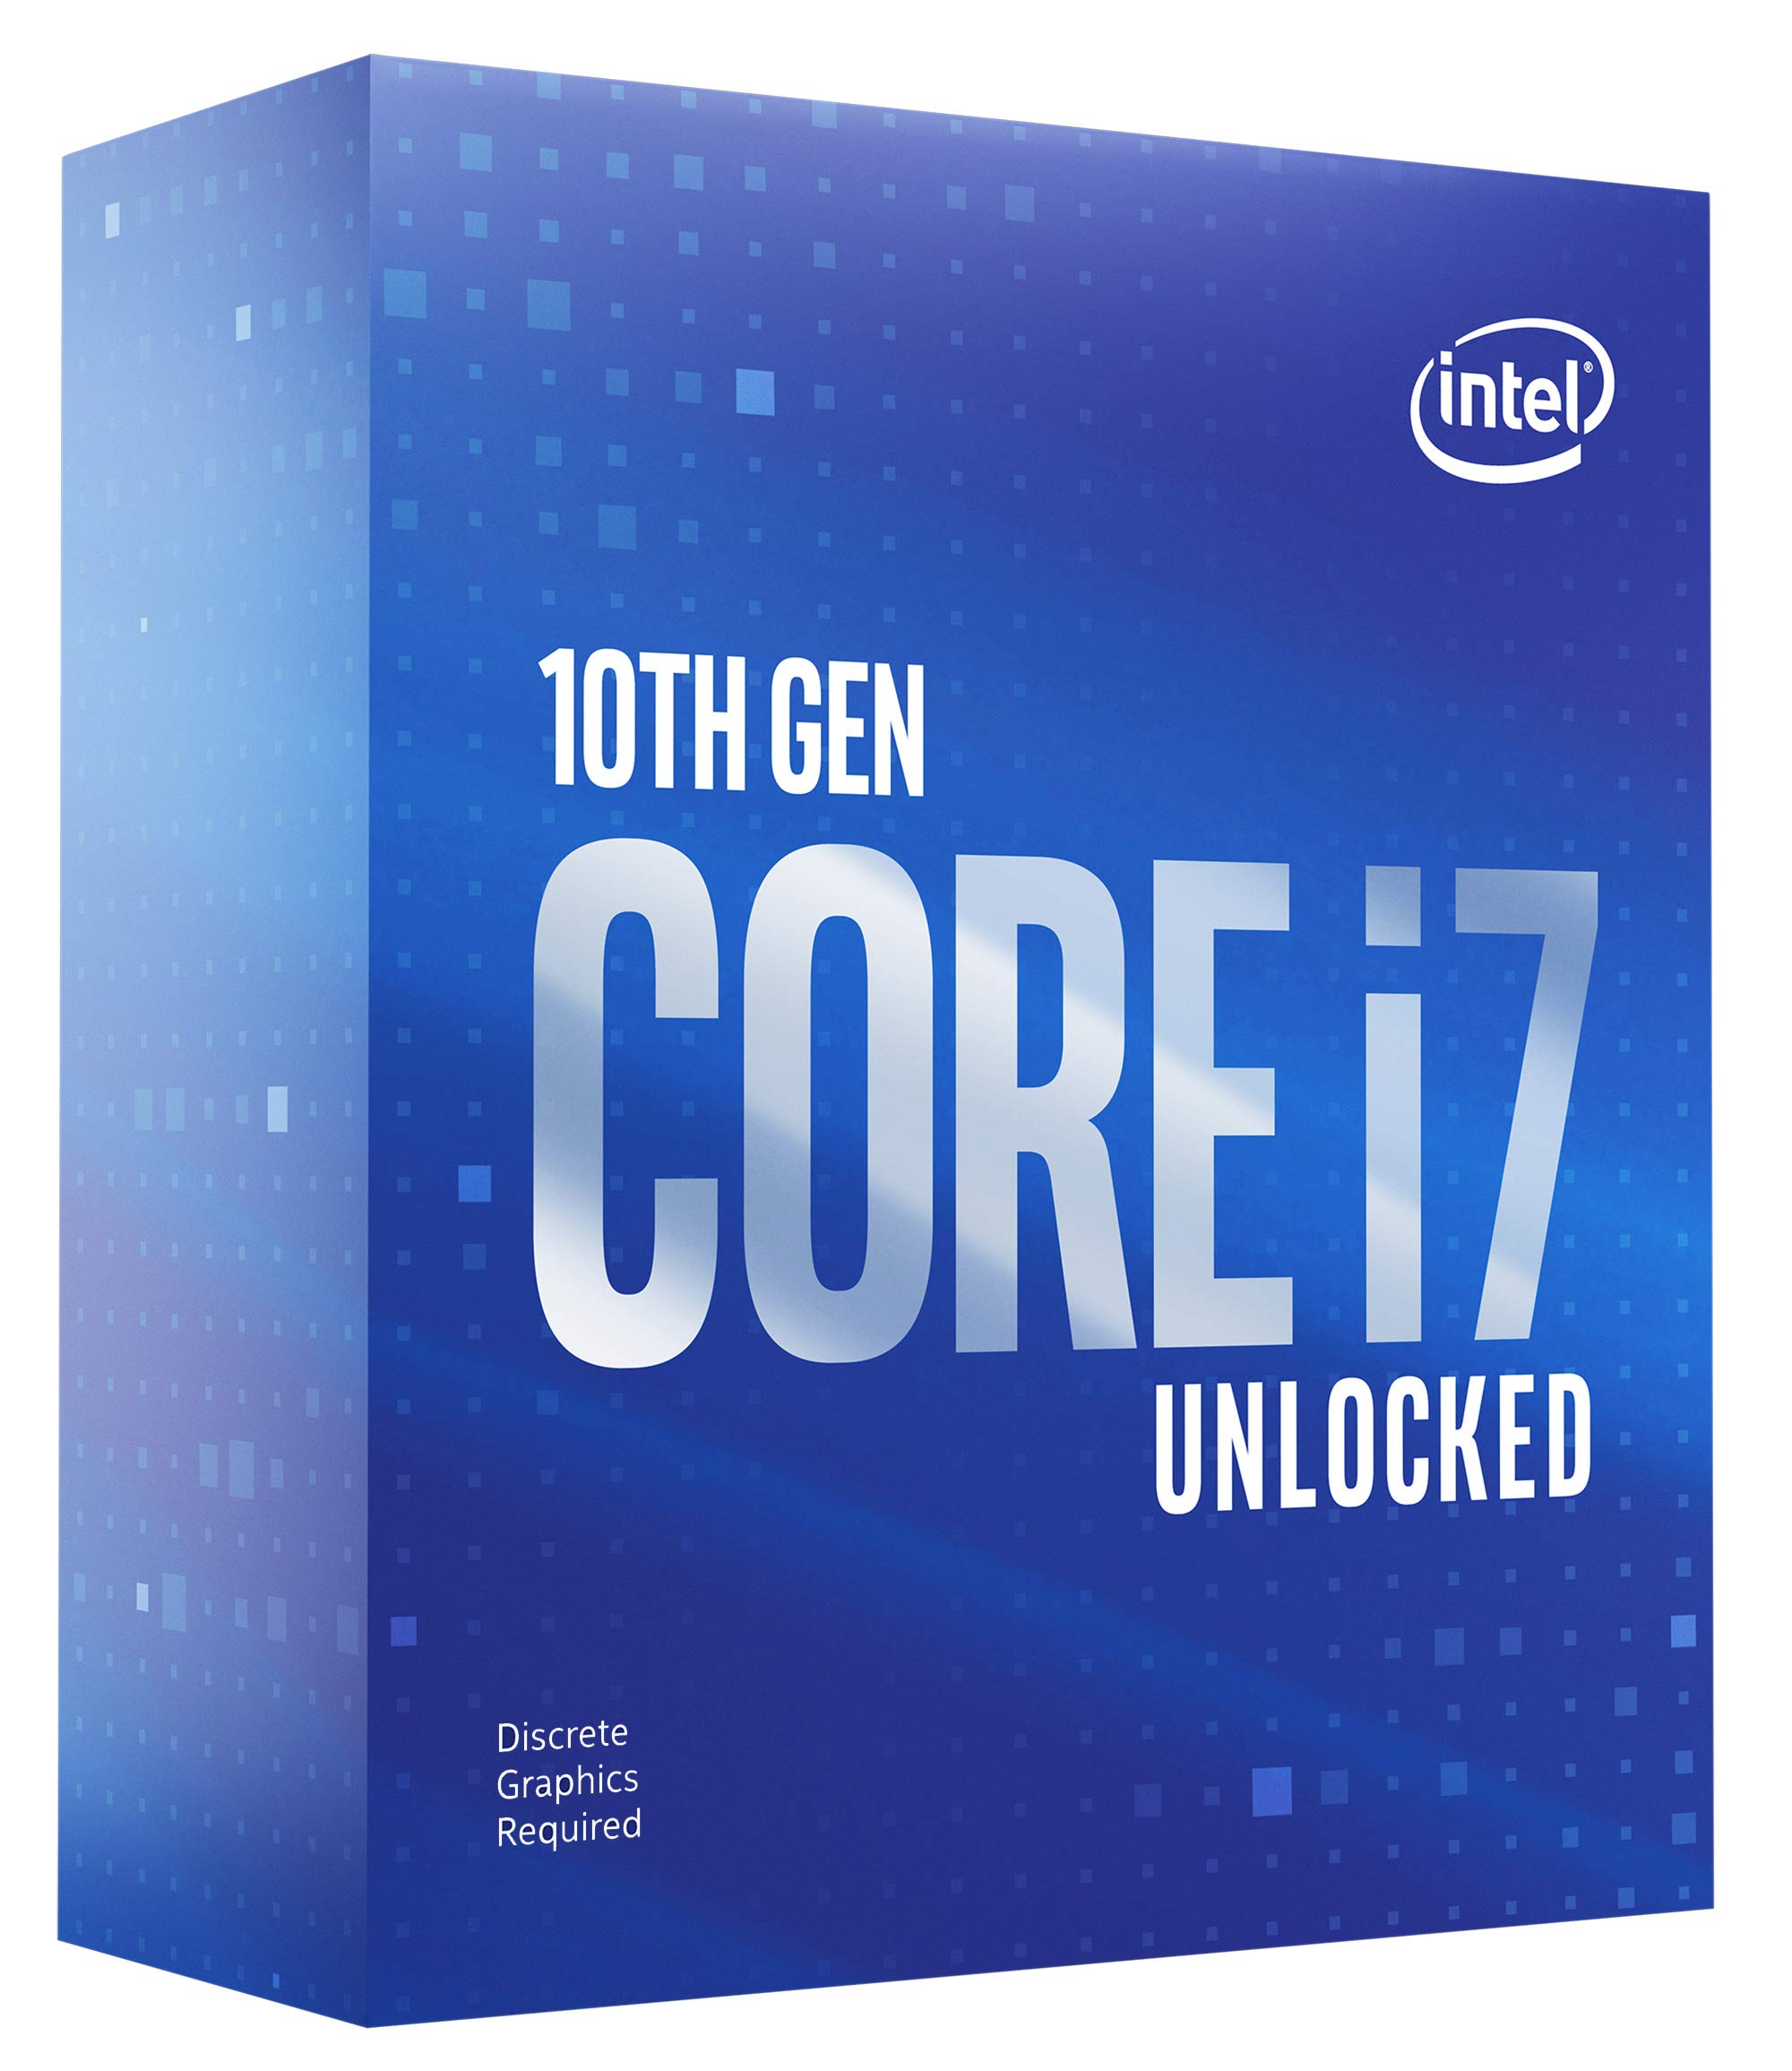 Intel Core i7-10700KF Desktop Processor 8 Cores up to 5.1 GHz Unlocked Without Processor Graphics LGA1200 (Intel 400 Series chipset) 125W $255